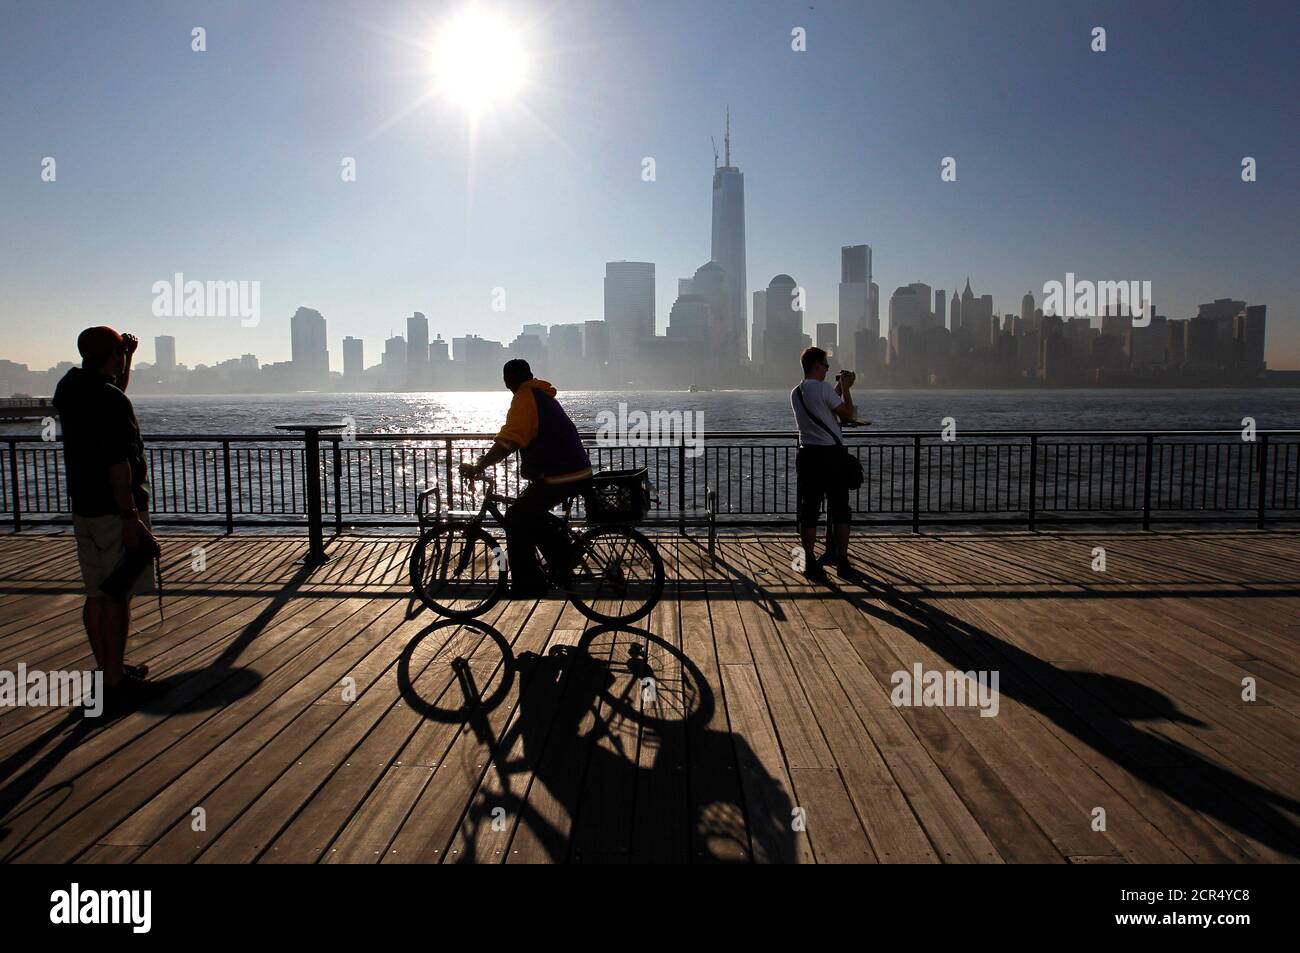 People look out at the Lower Manhattan skyline from a promenade next to the  Hudson River in Jersey City, New Jersey May 8, 2013. New York City is  iconic in any weather,